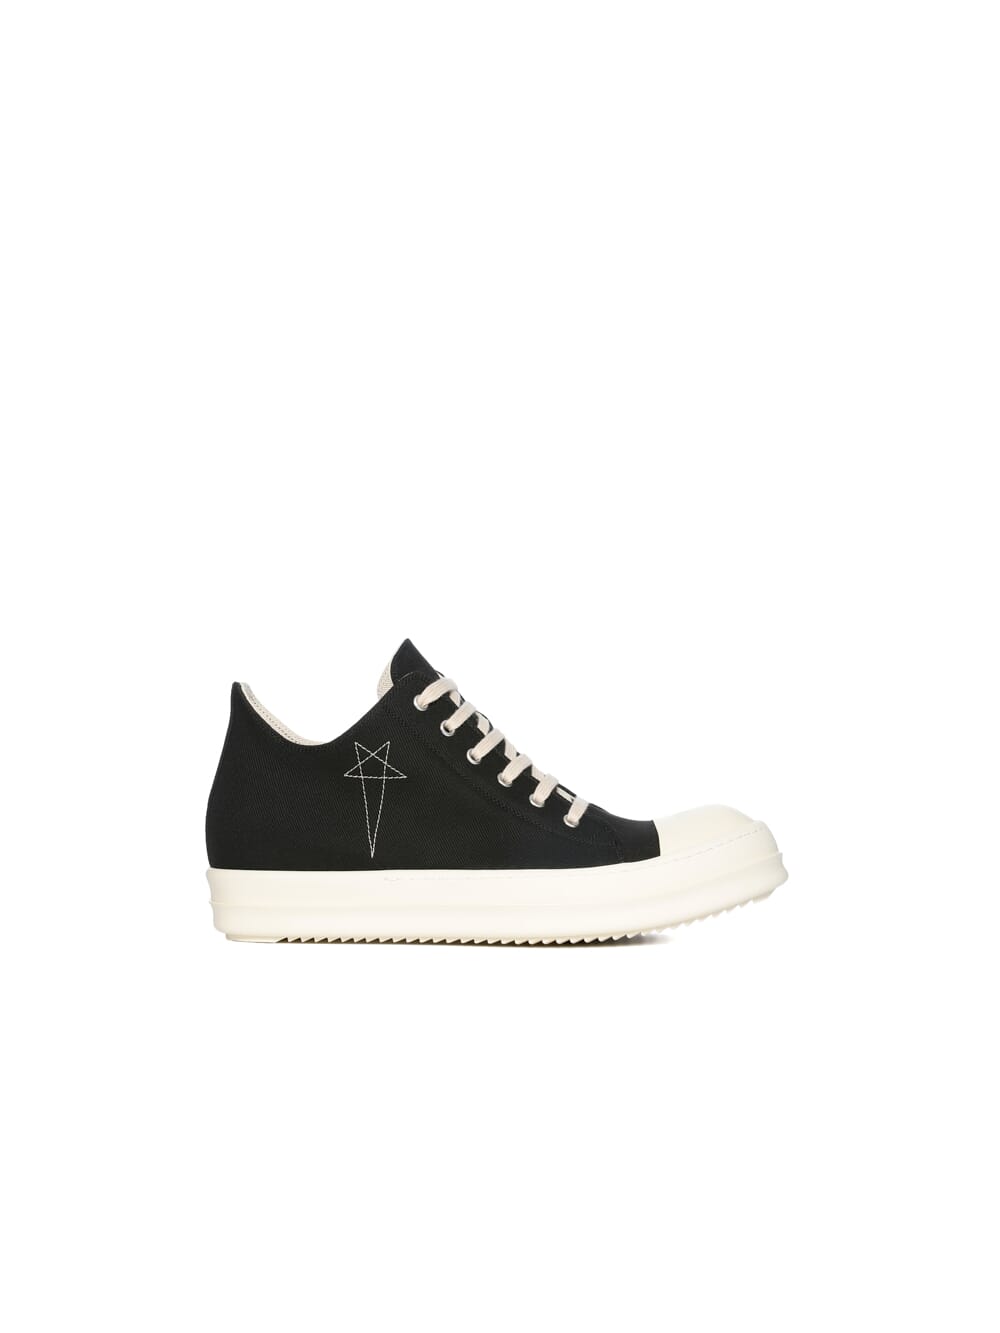 DRKSHDW FW23 LUXOR LOW SNEAKS IN BLACK AND PEARL 13OZ OVERDYED DENIM